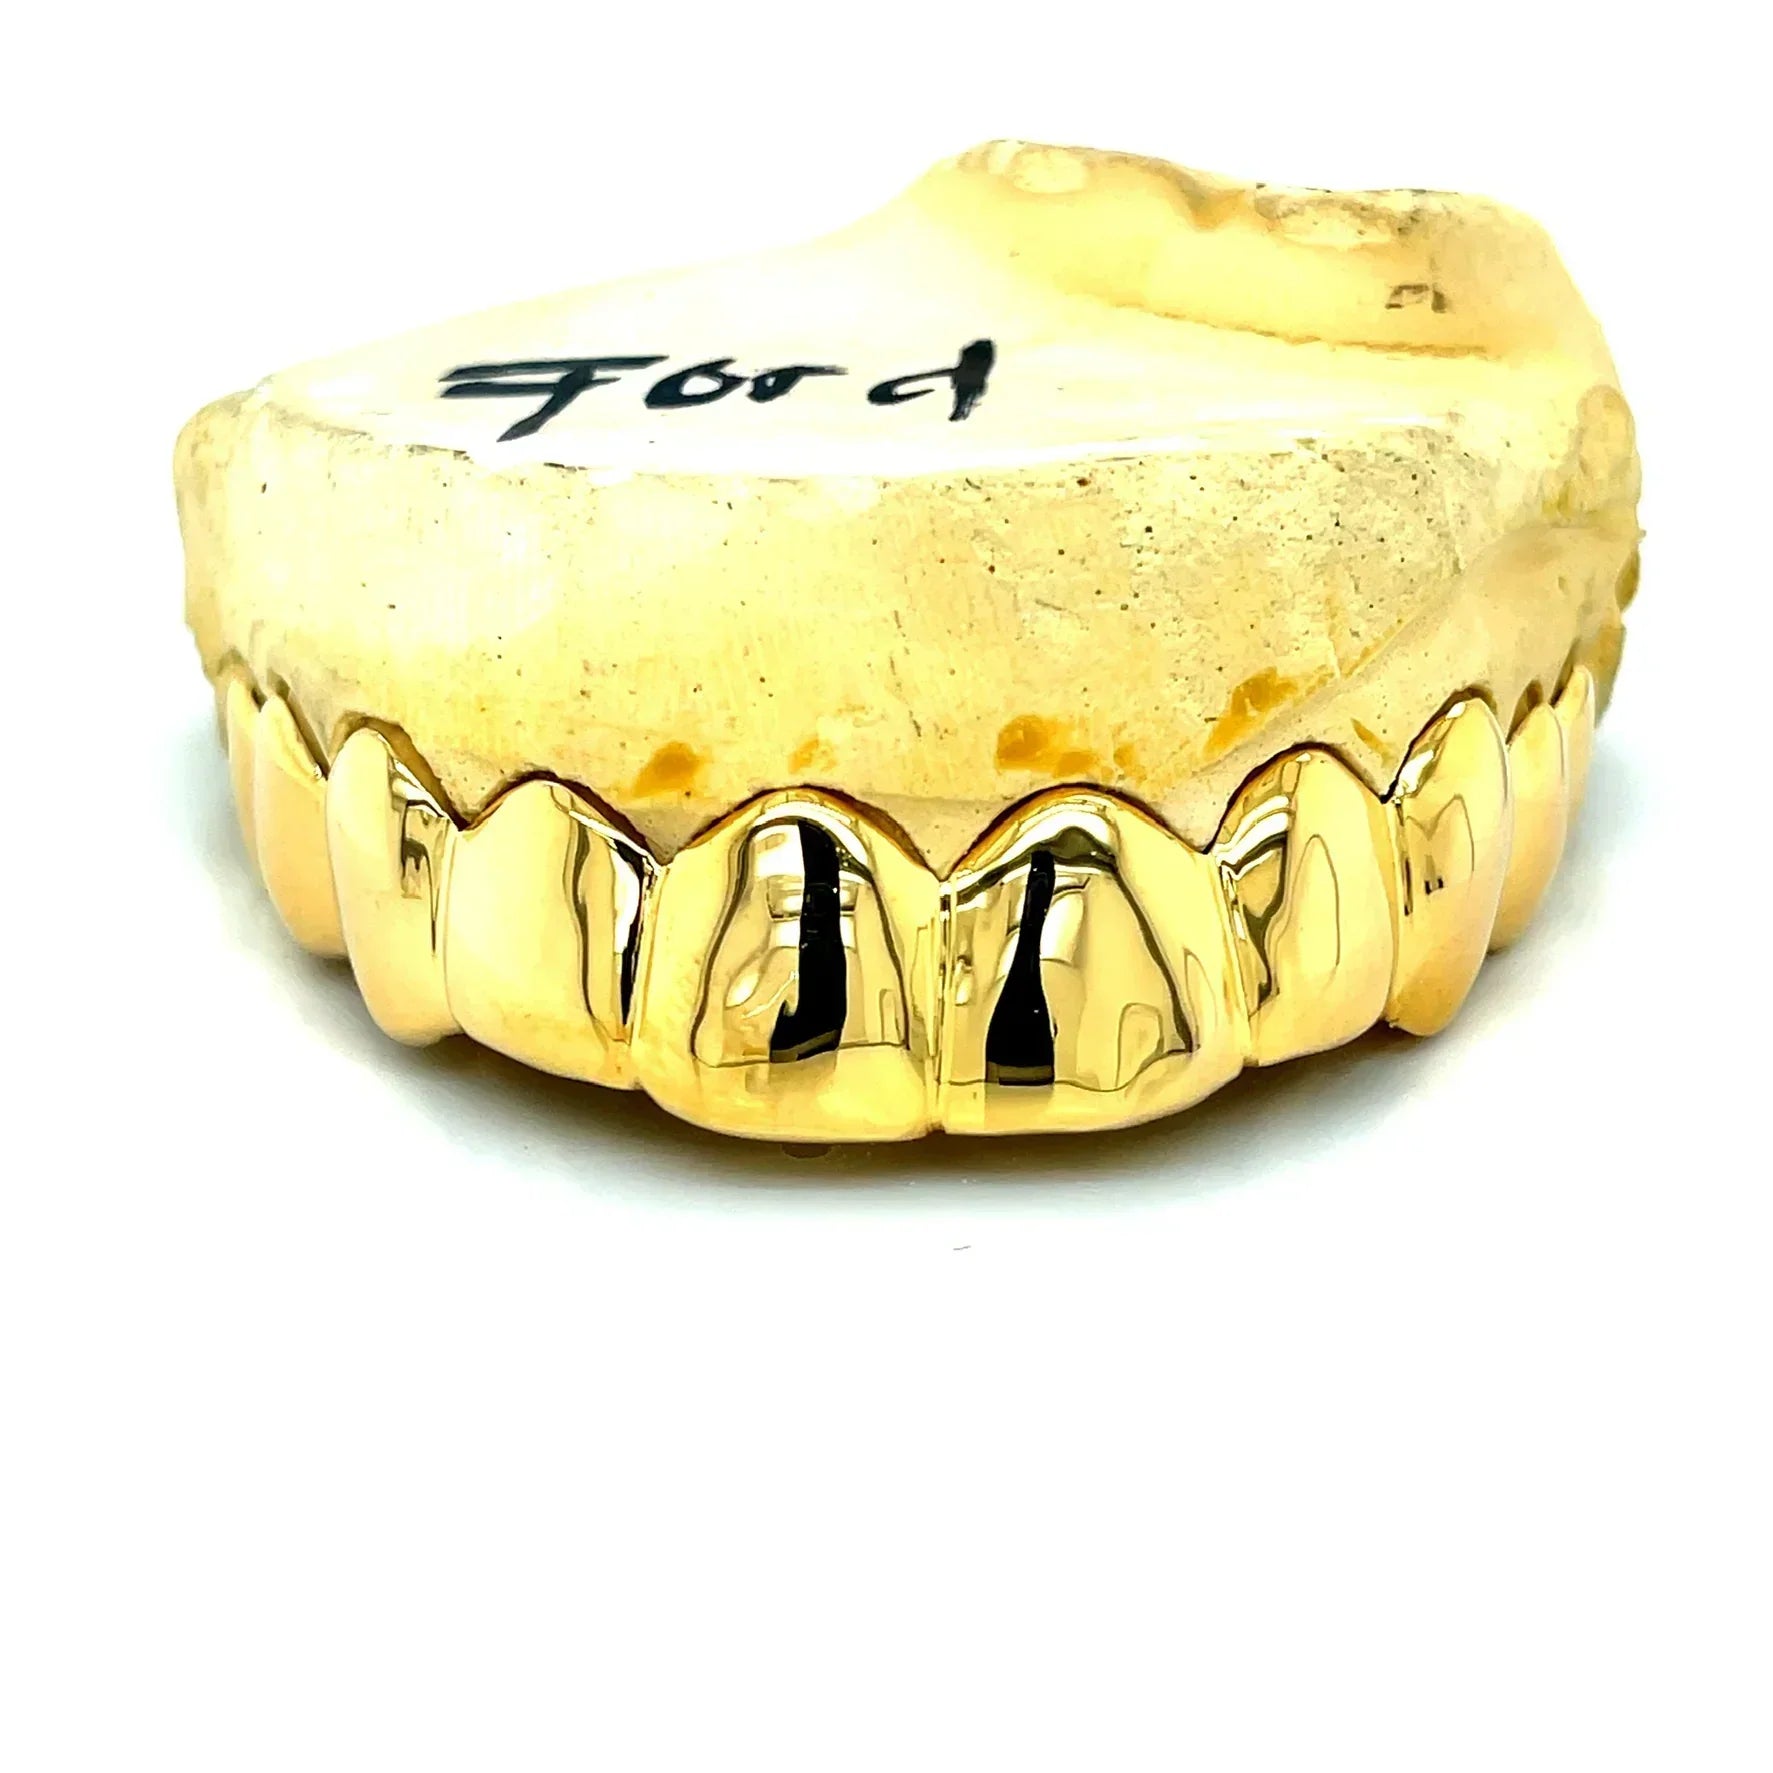 10pc Solid Gold Top Grillz - Seattle Gold Grillz